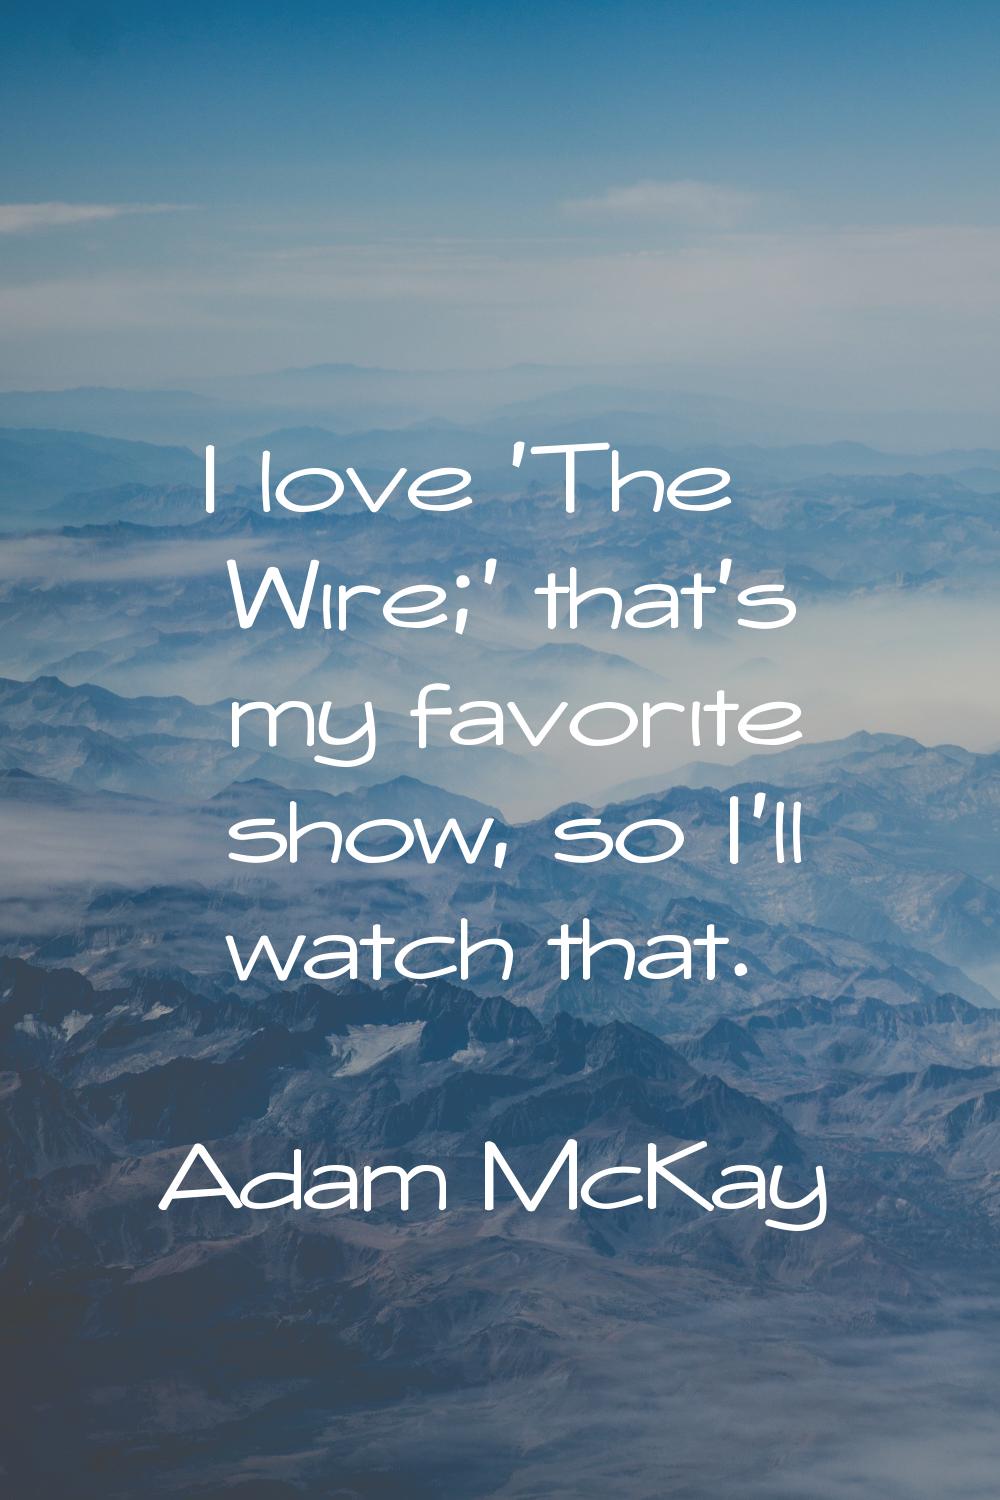 I love 'The Wire;' that's my favorite show, so I'll watch that.